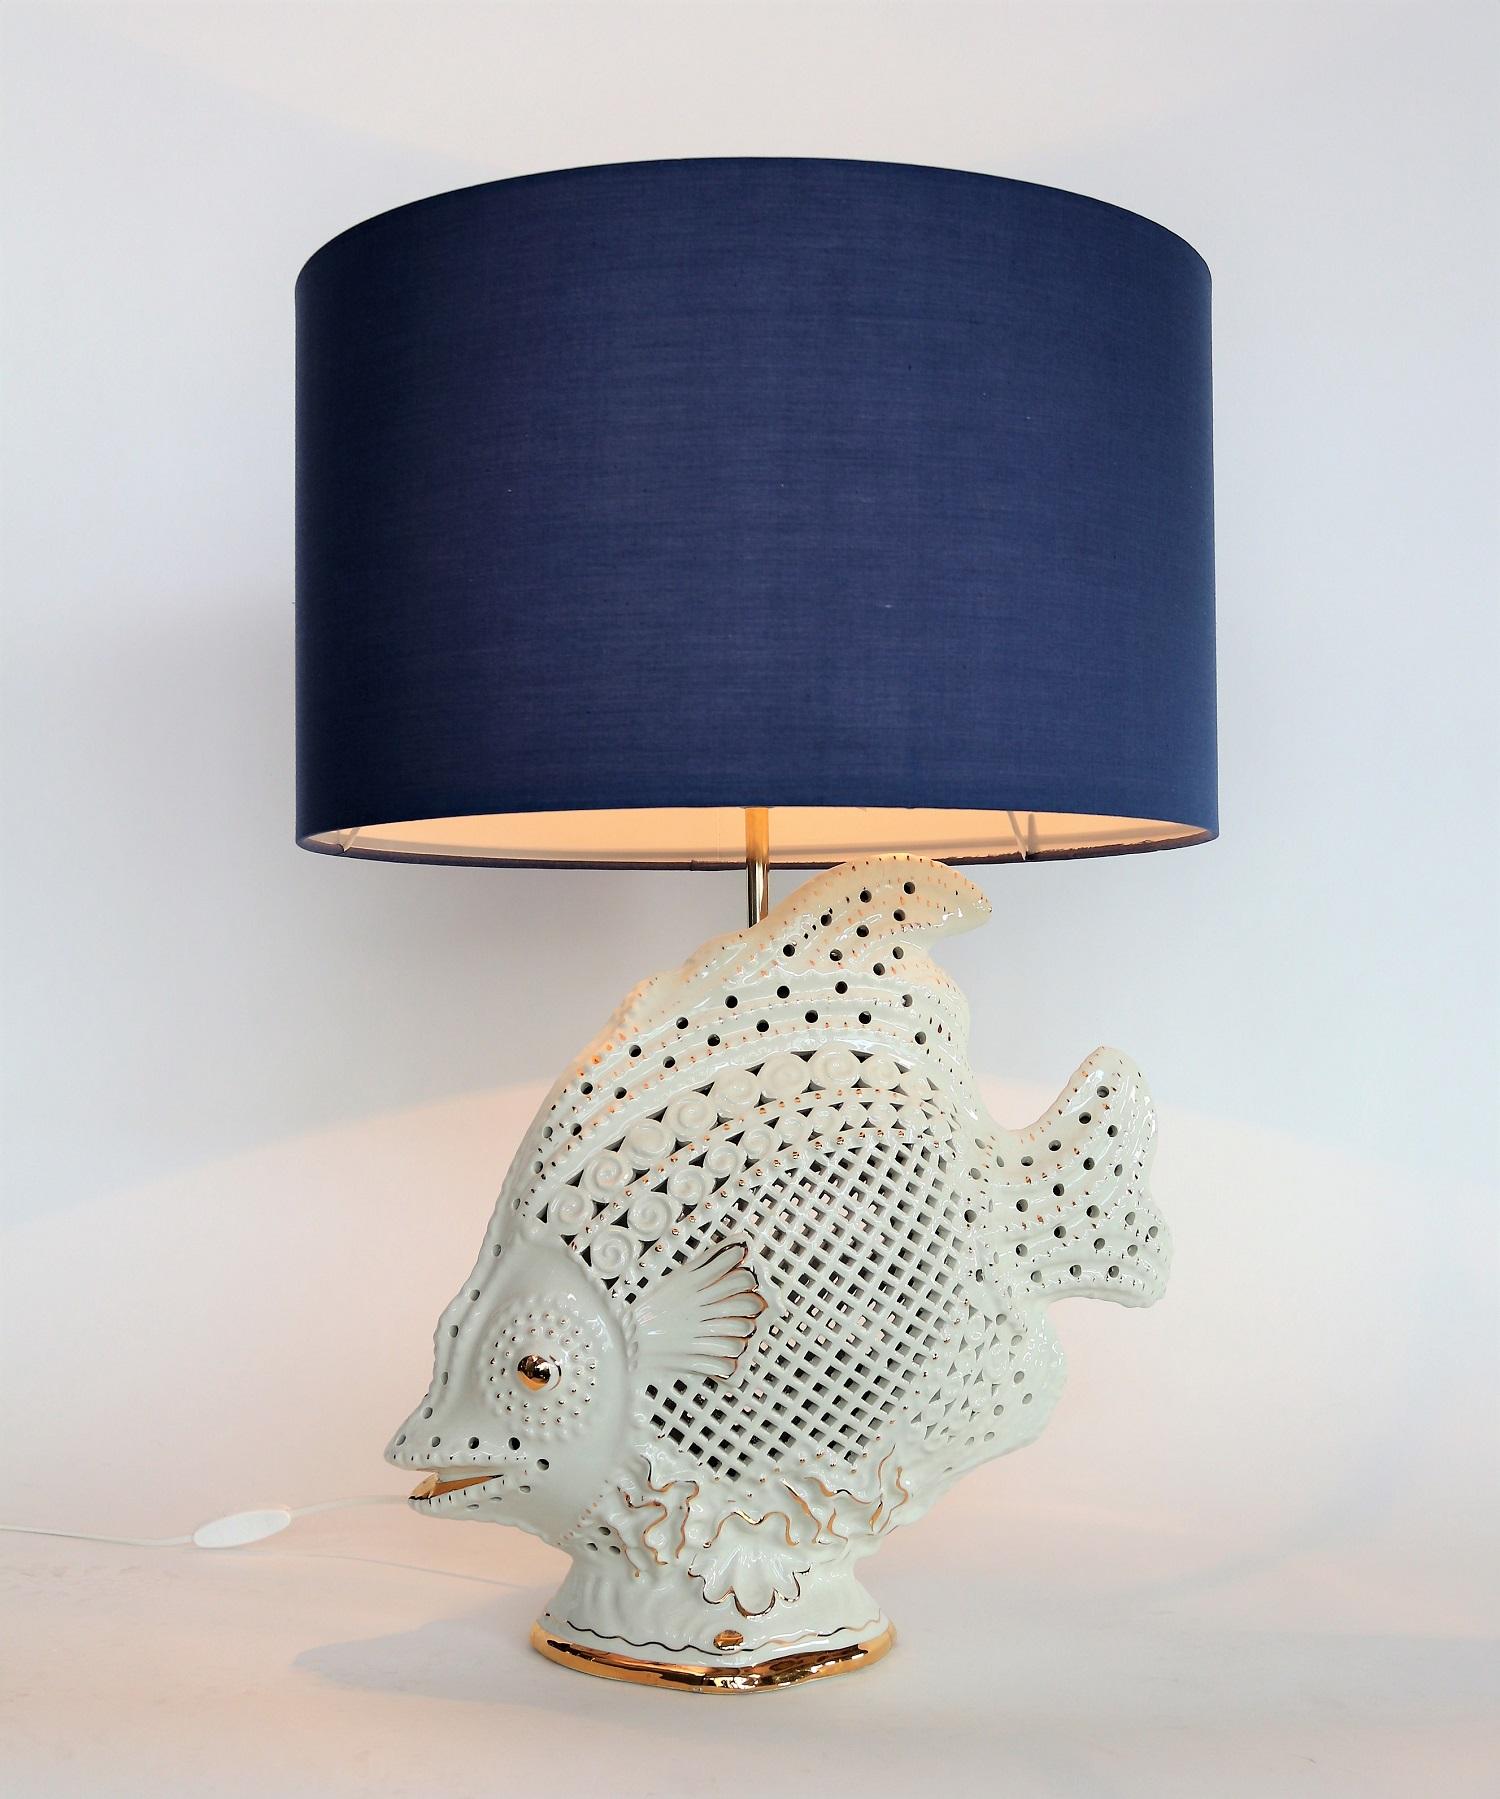 Italian Midcentury Big Ceramic Fish Lamp with Brass Details, 1960s For Sale 4